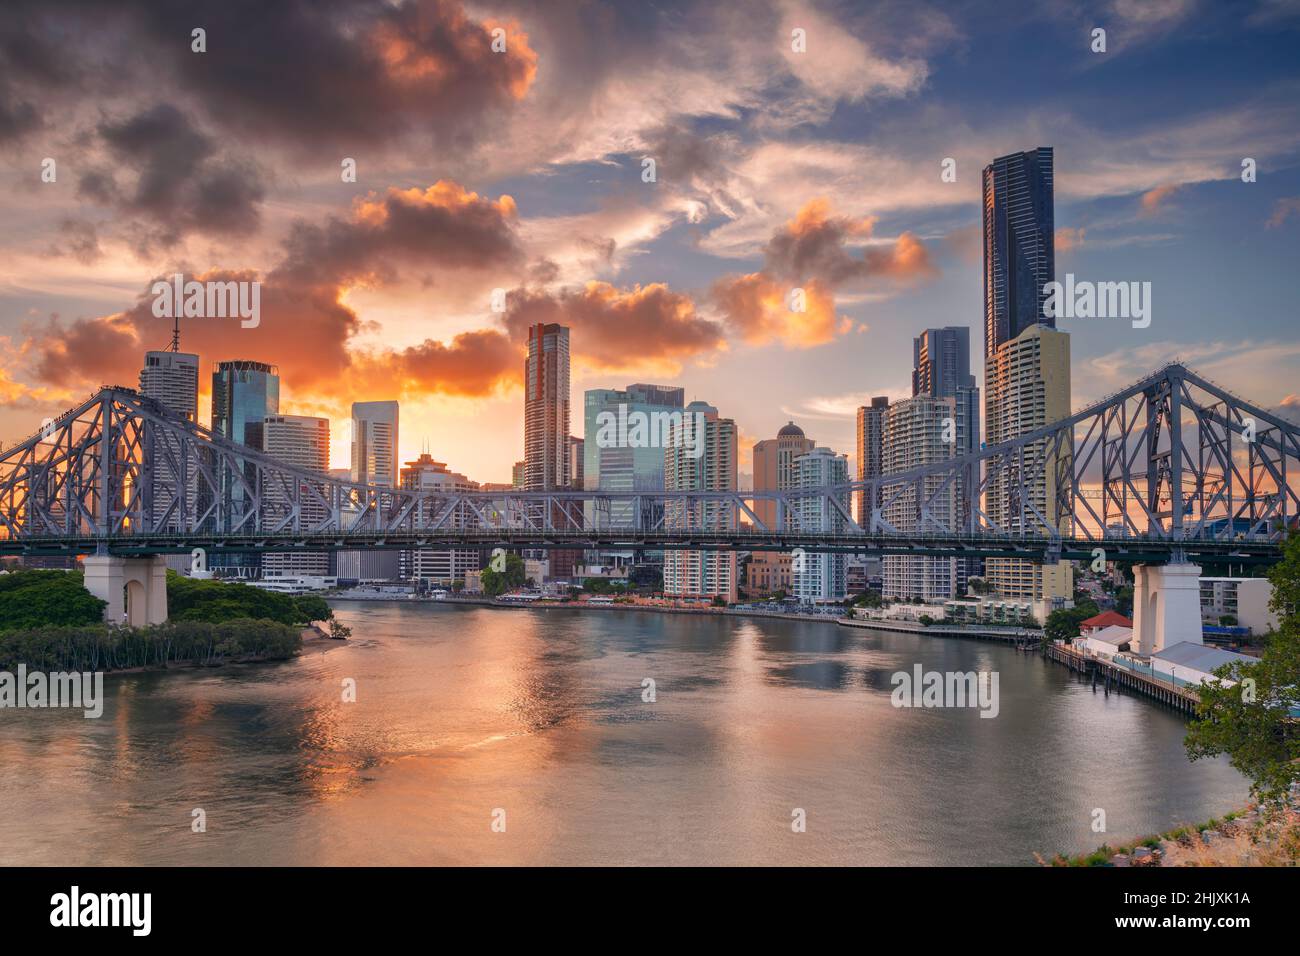 Brisbane, Australia. Cityscape image of Brisbane skyline with the Story Bridge and reflection of the city in Brisbane River at sunset. Stock Photo